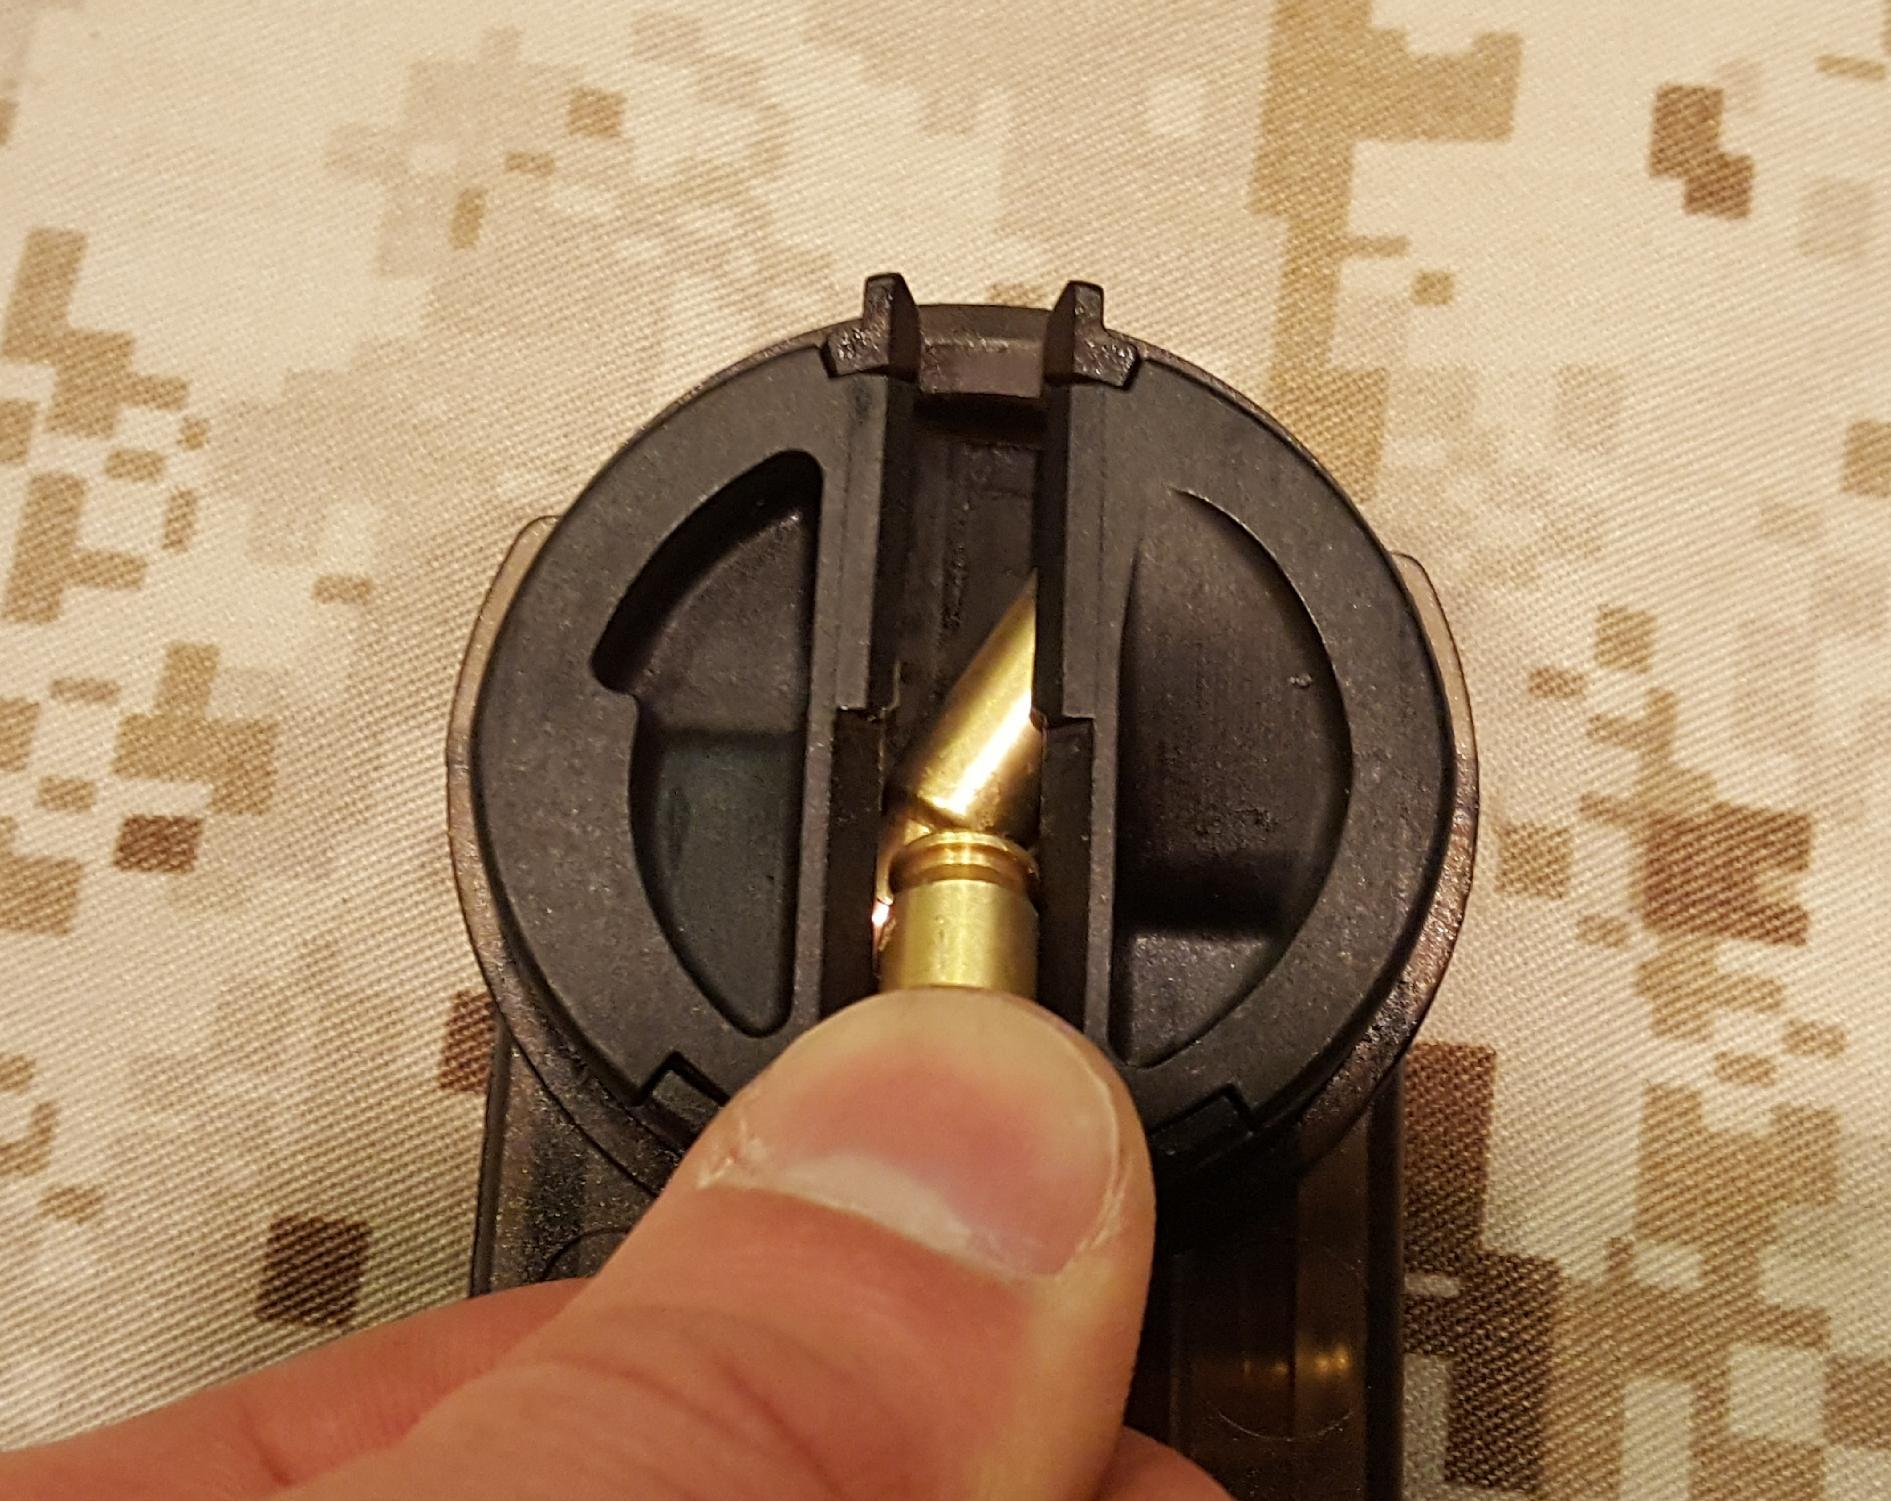 FN P90 magazine rounds are situated horizontally in the magazine, so they have to be rotated with a ramp located at the rear of the magazine